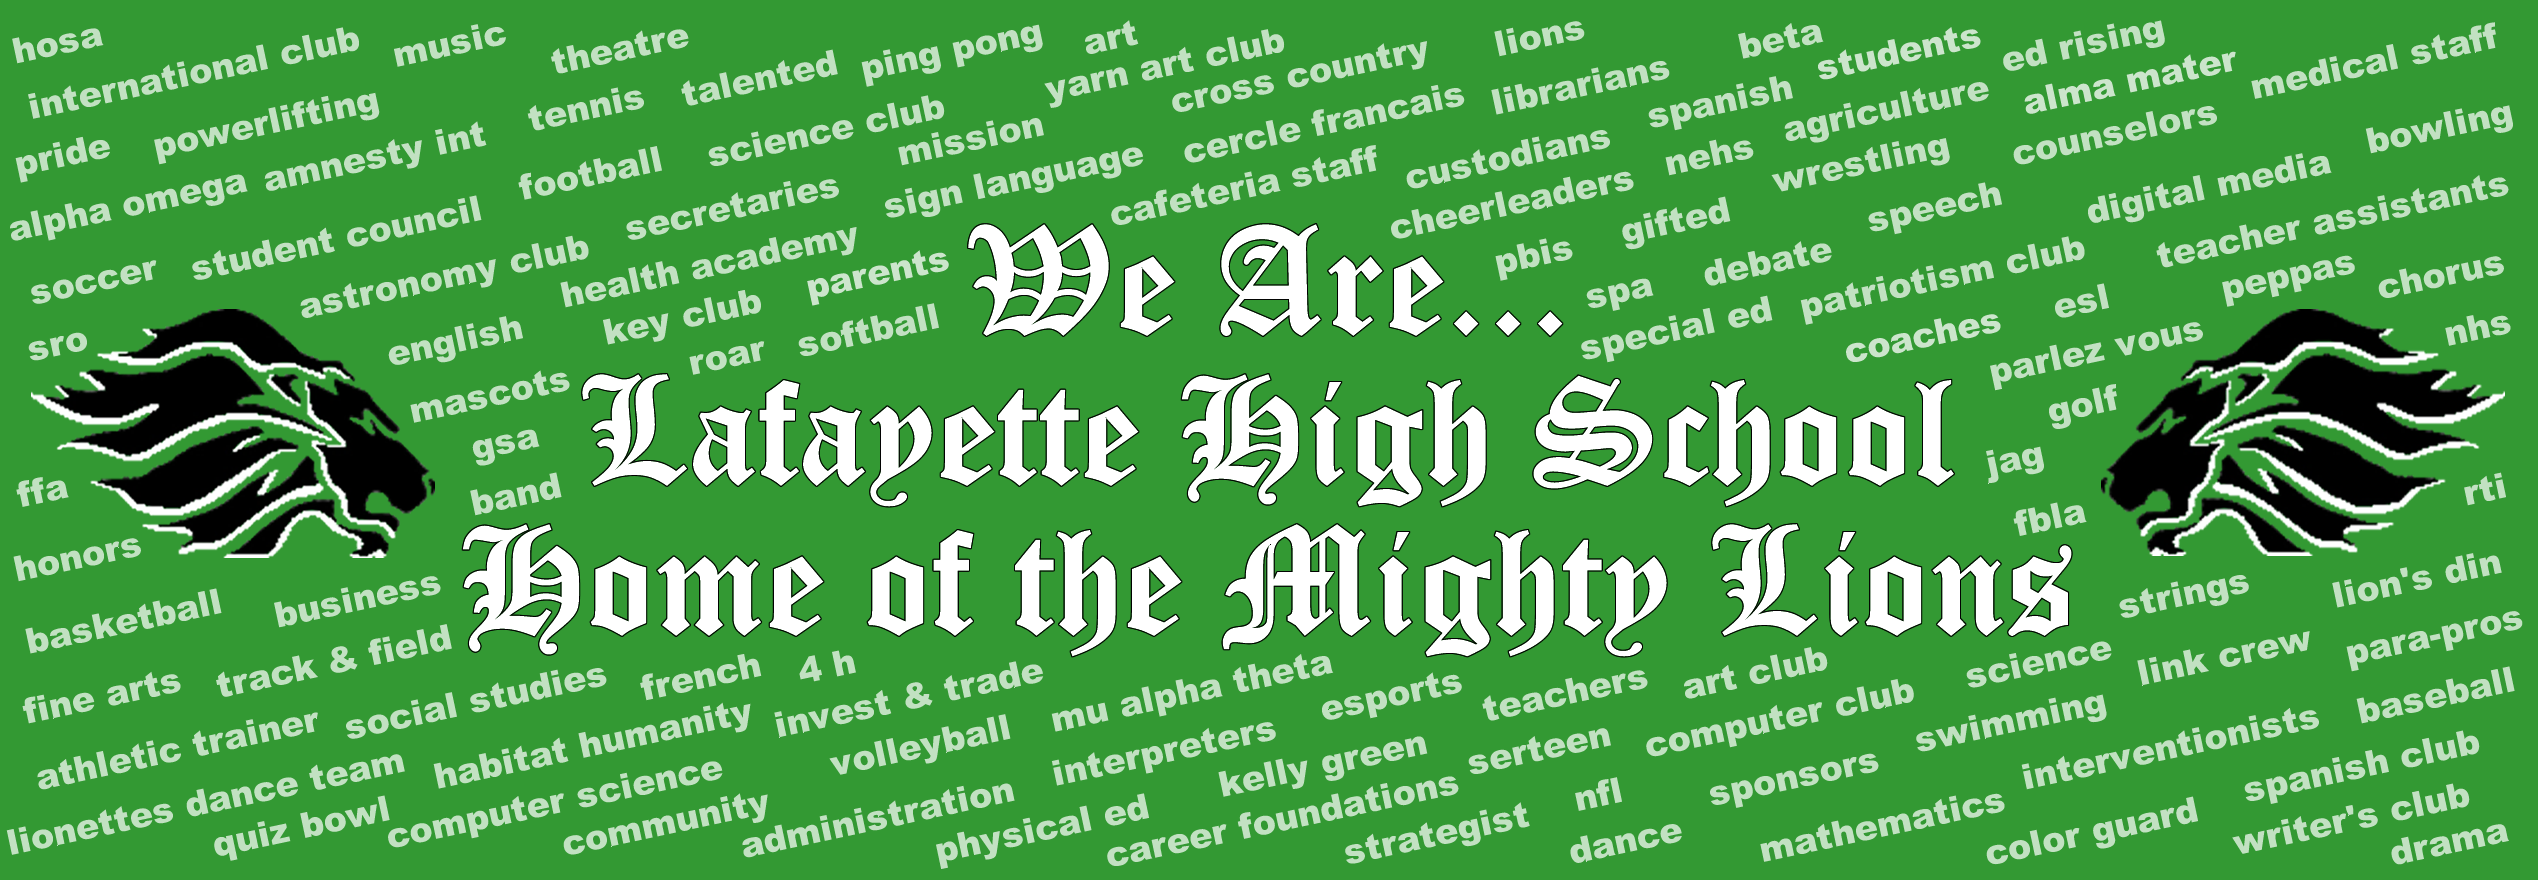 We Are . . . Lafayette High School - Home of the Mighty Lions!